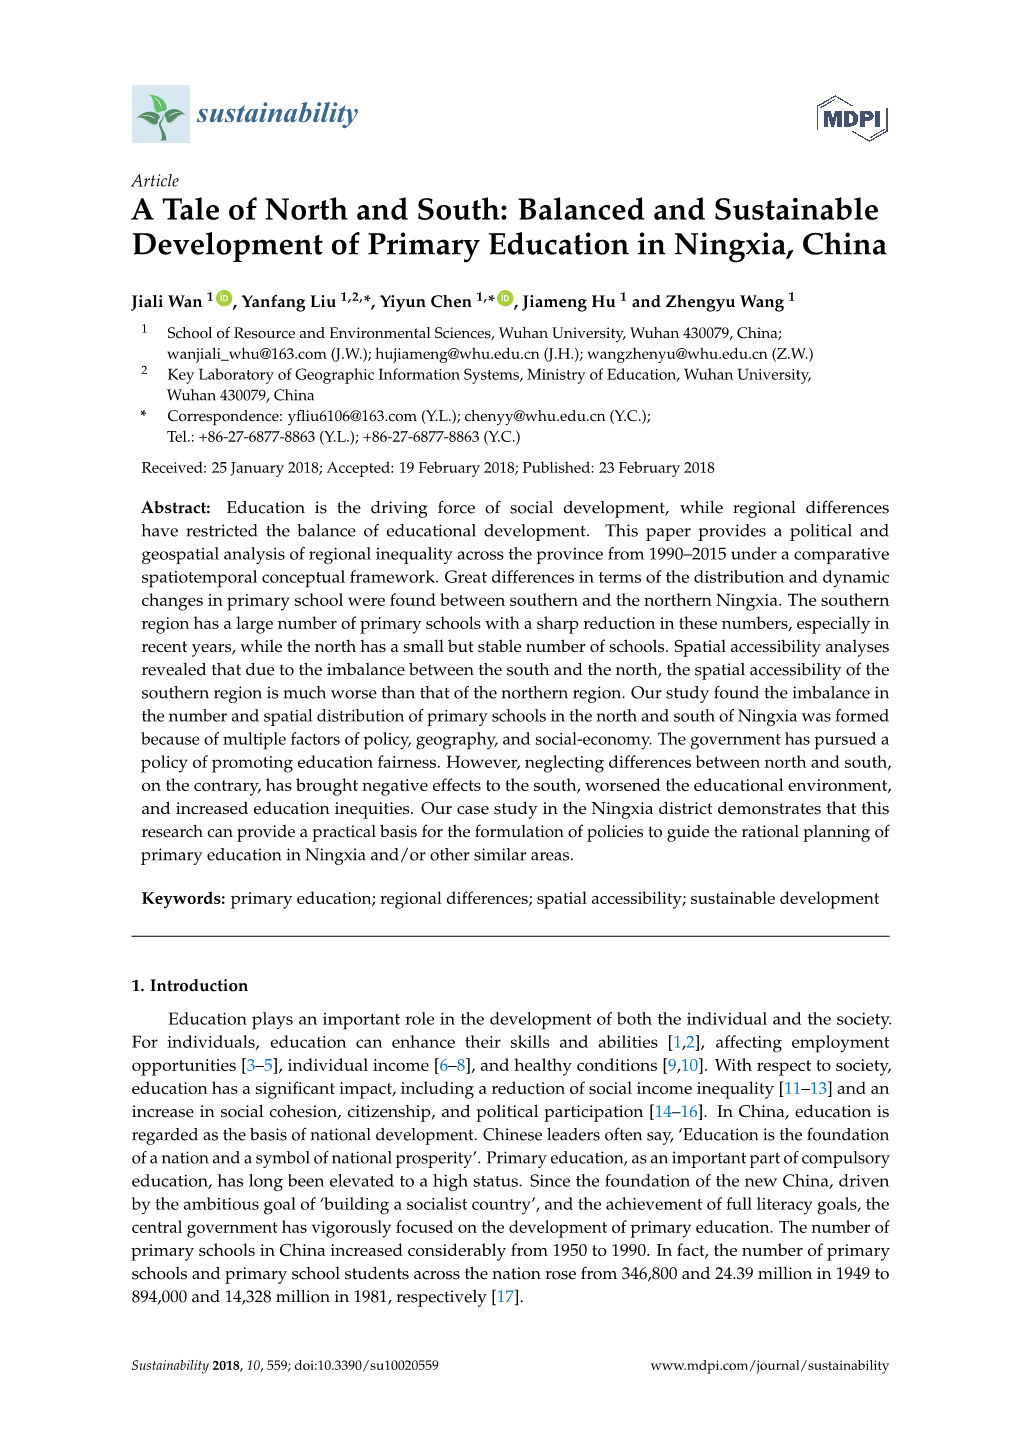 Balanced and Sustainable Development of Primary Education in Ningxia, China